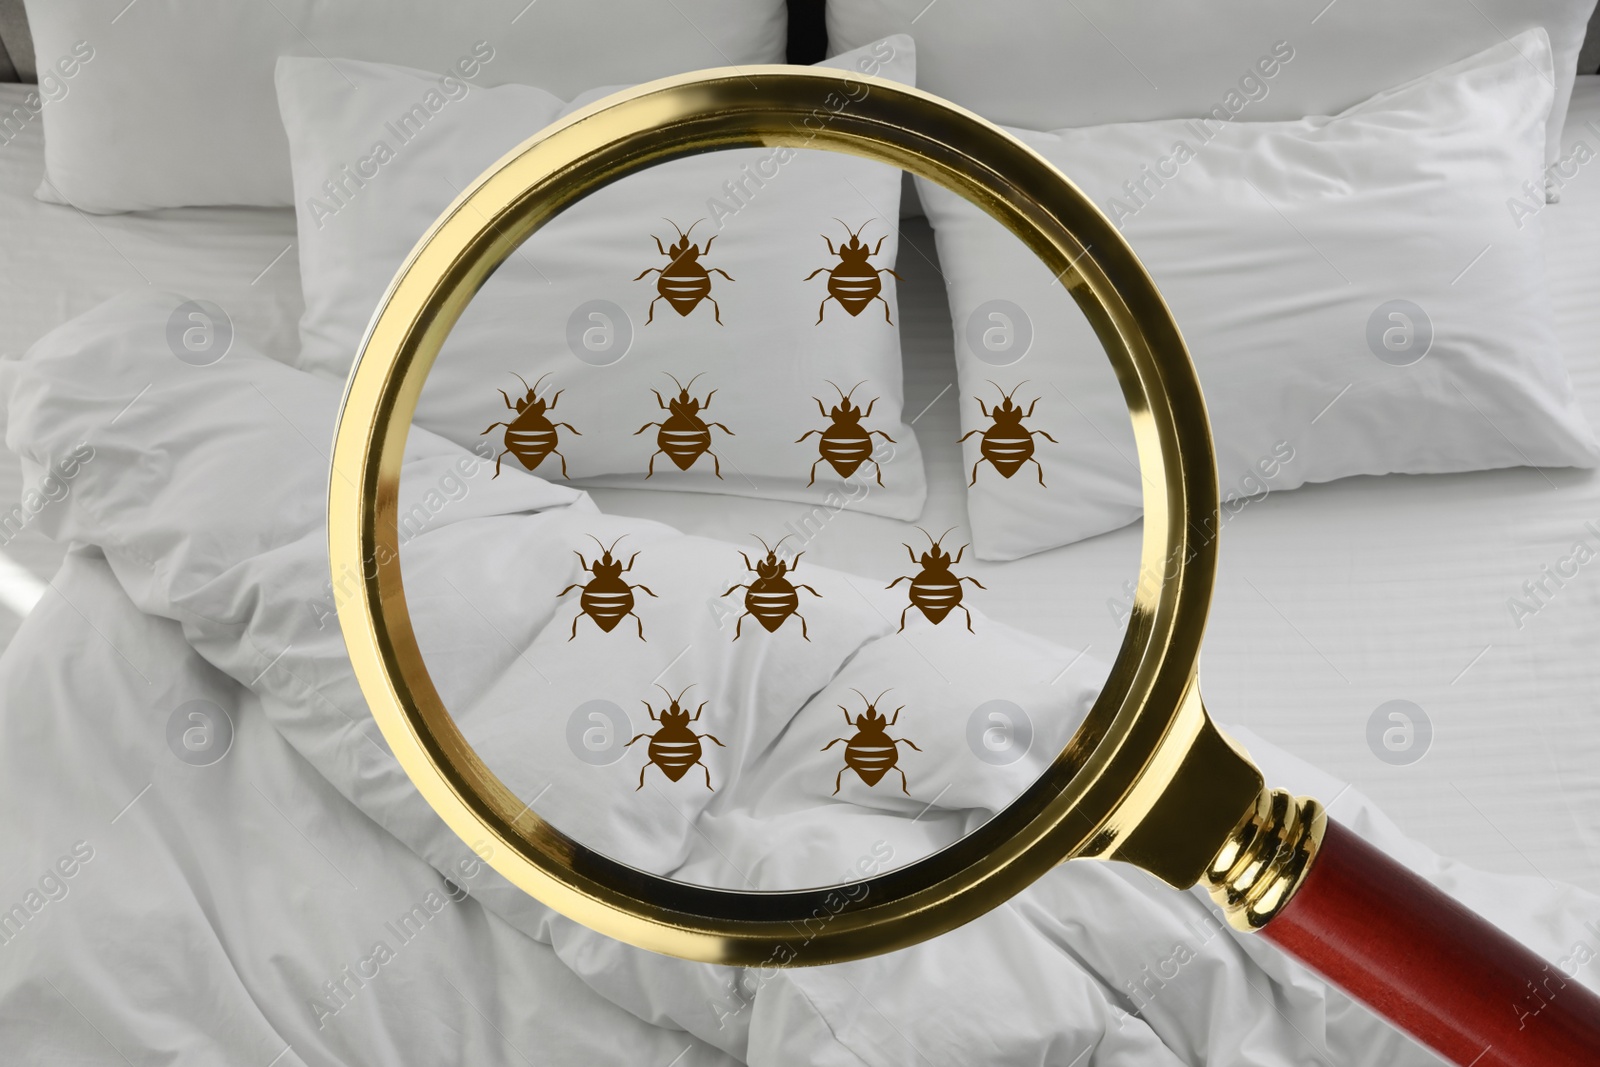 Image of Magnifying glass detecting bed bugs in bedroom, closeup view